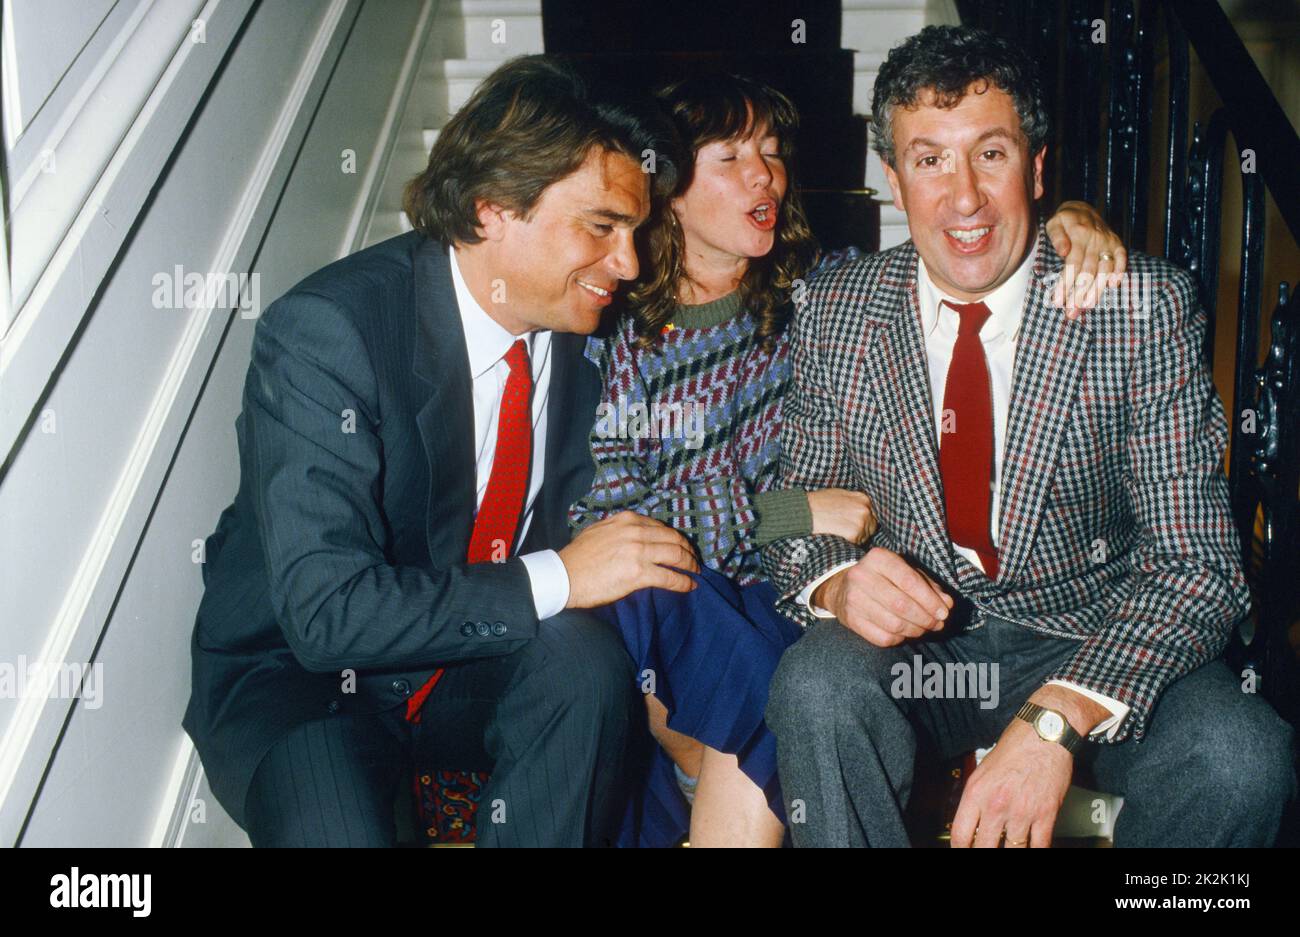 Businessman Bernard Tapie, television producer Marie-France Brière and comedian Stéphane Collaro. 1986 Stock Photo